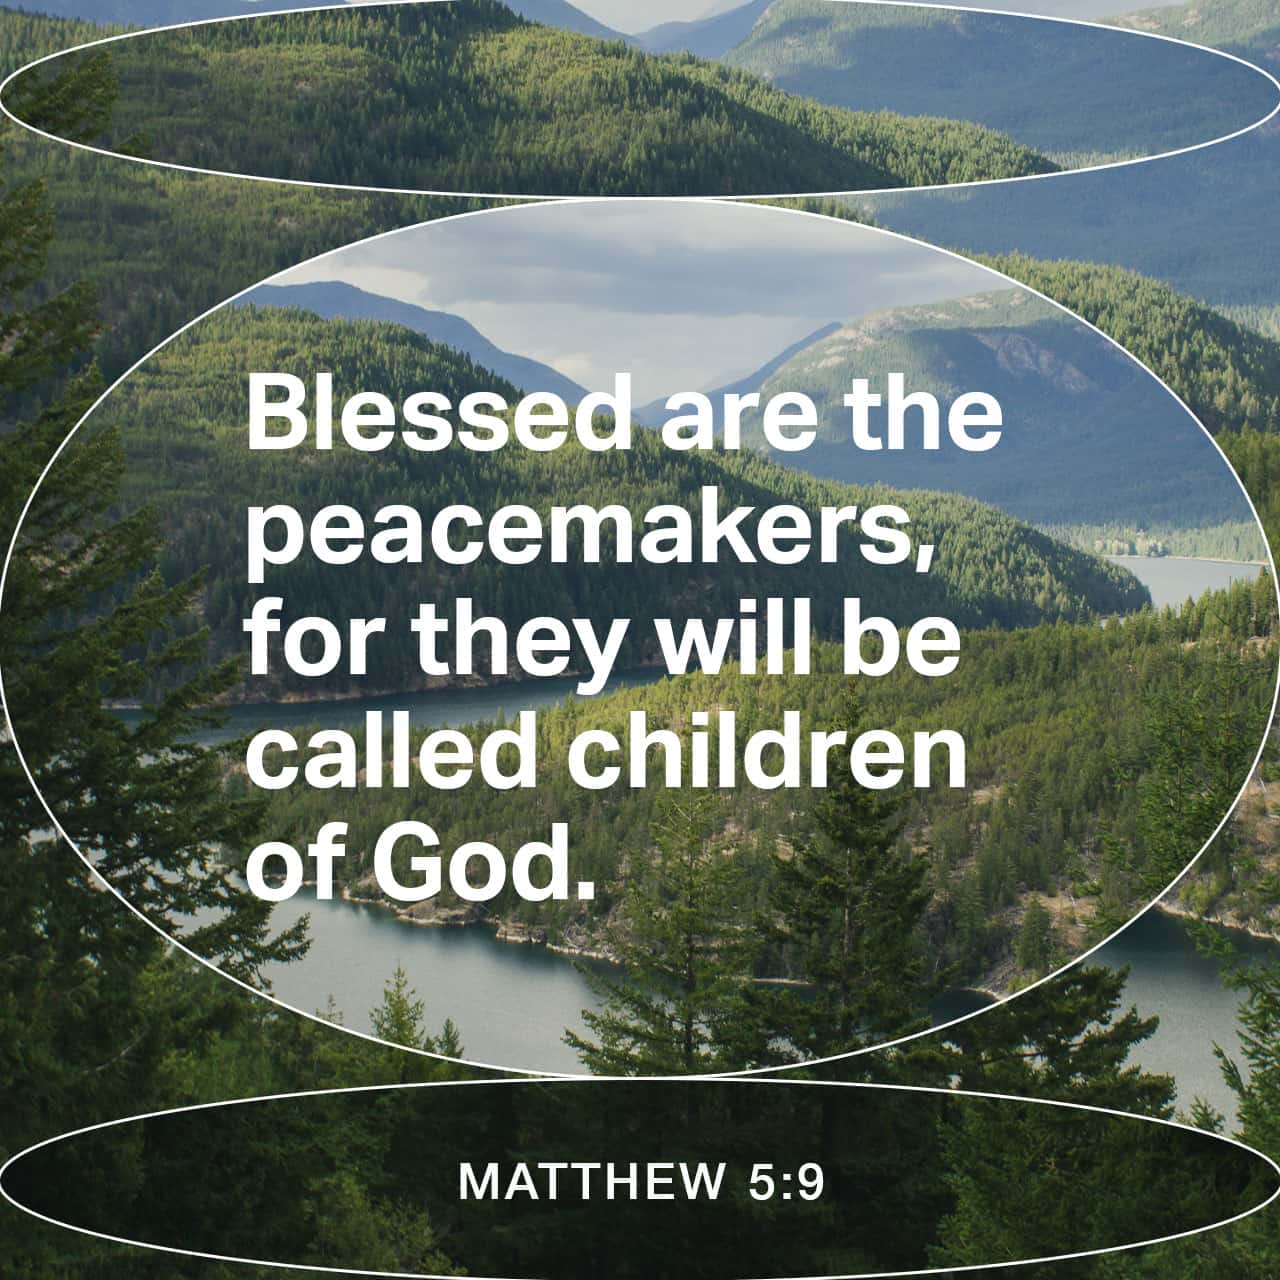 Matthew 5:9 Blessed are the peacemakers, for they shall be called children of God. | World English Bible (WEB) | Download The Bible App Now